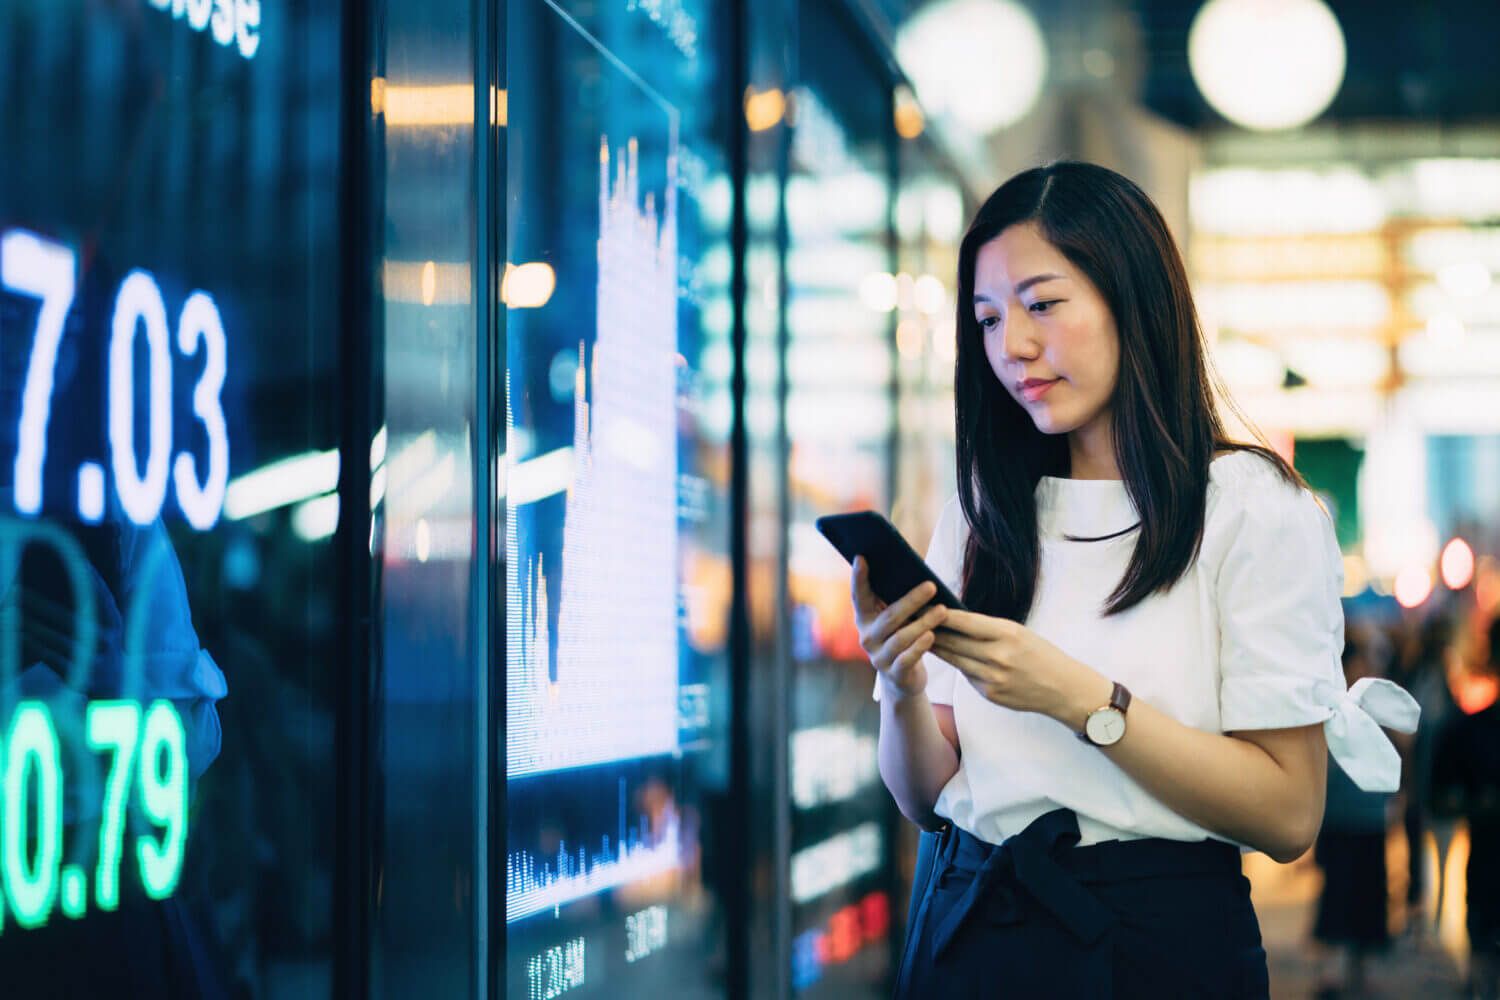 Confident young Asian businesswoman checking financial trading data on smartphone by the stock exchange market display screen board in downtown financial district